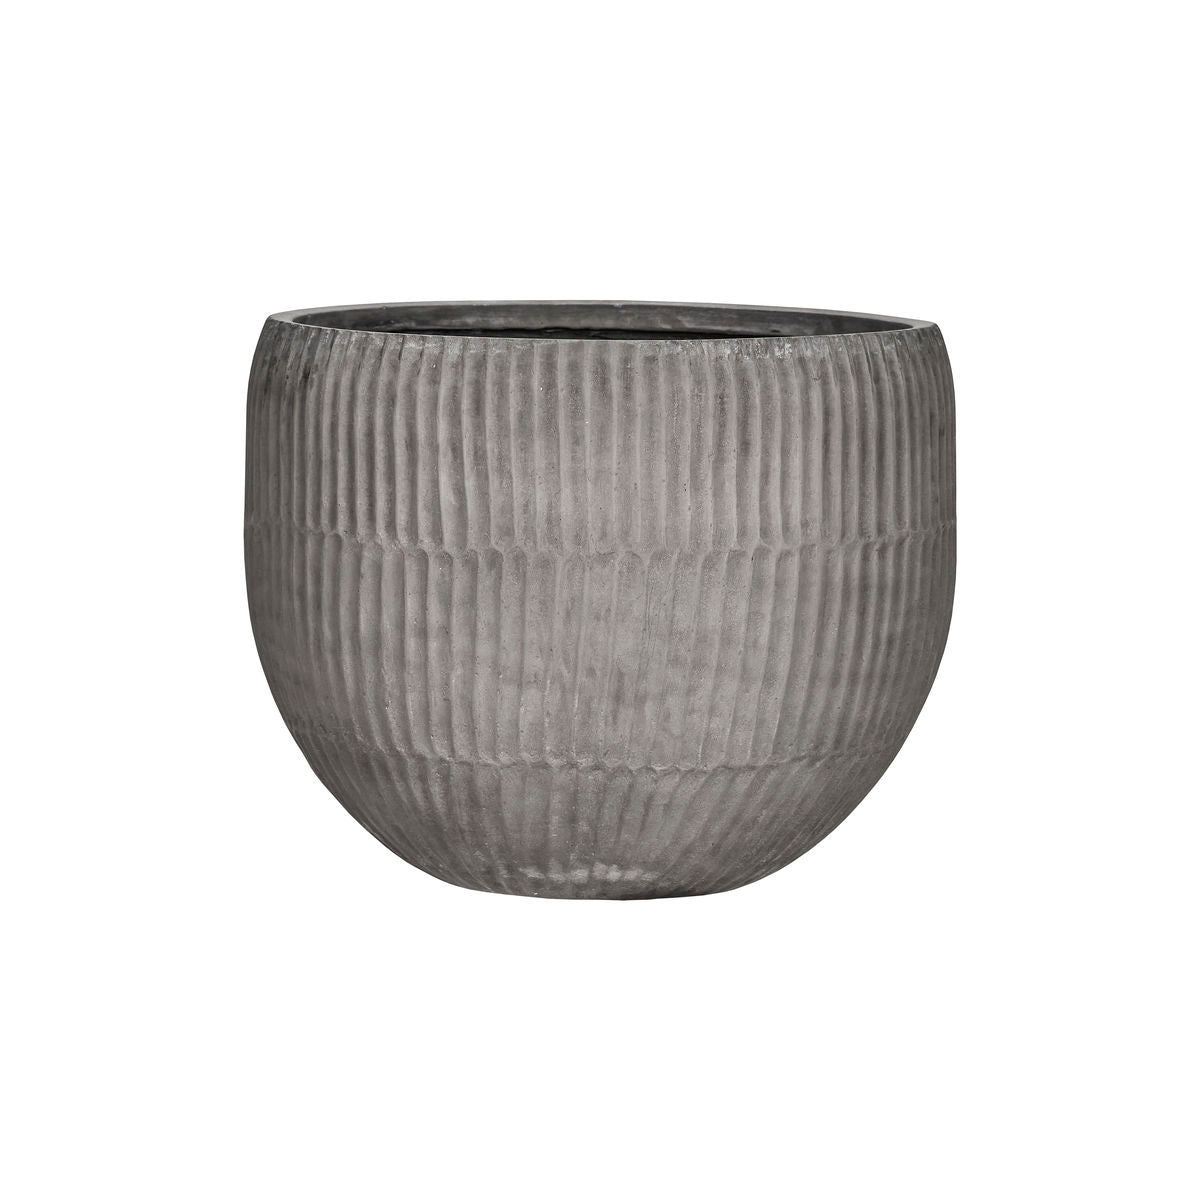 House Doctor Planter, Hdbrave, Gray